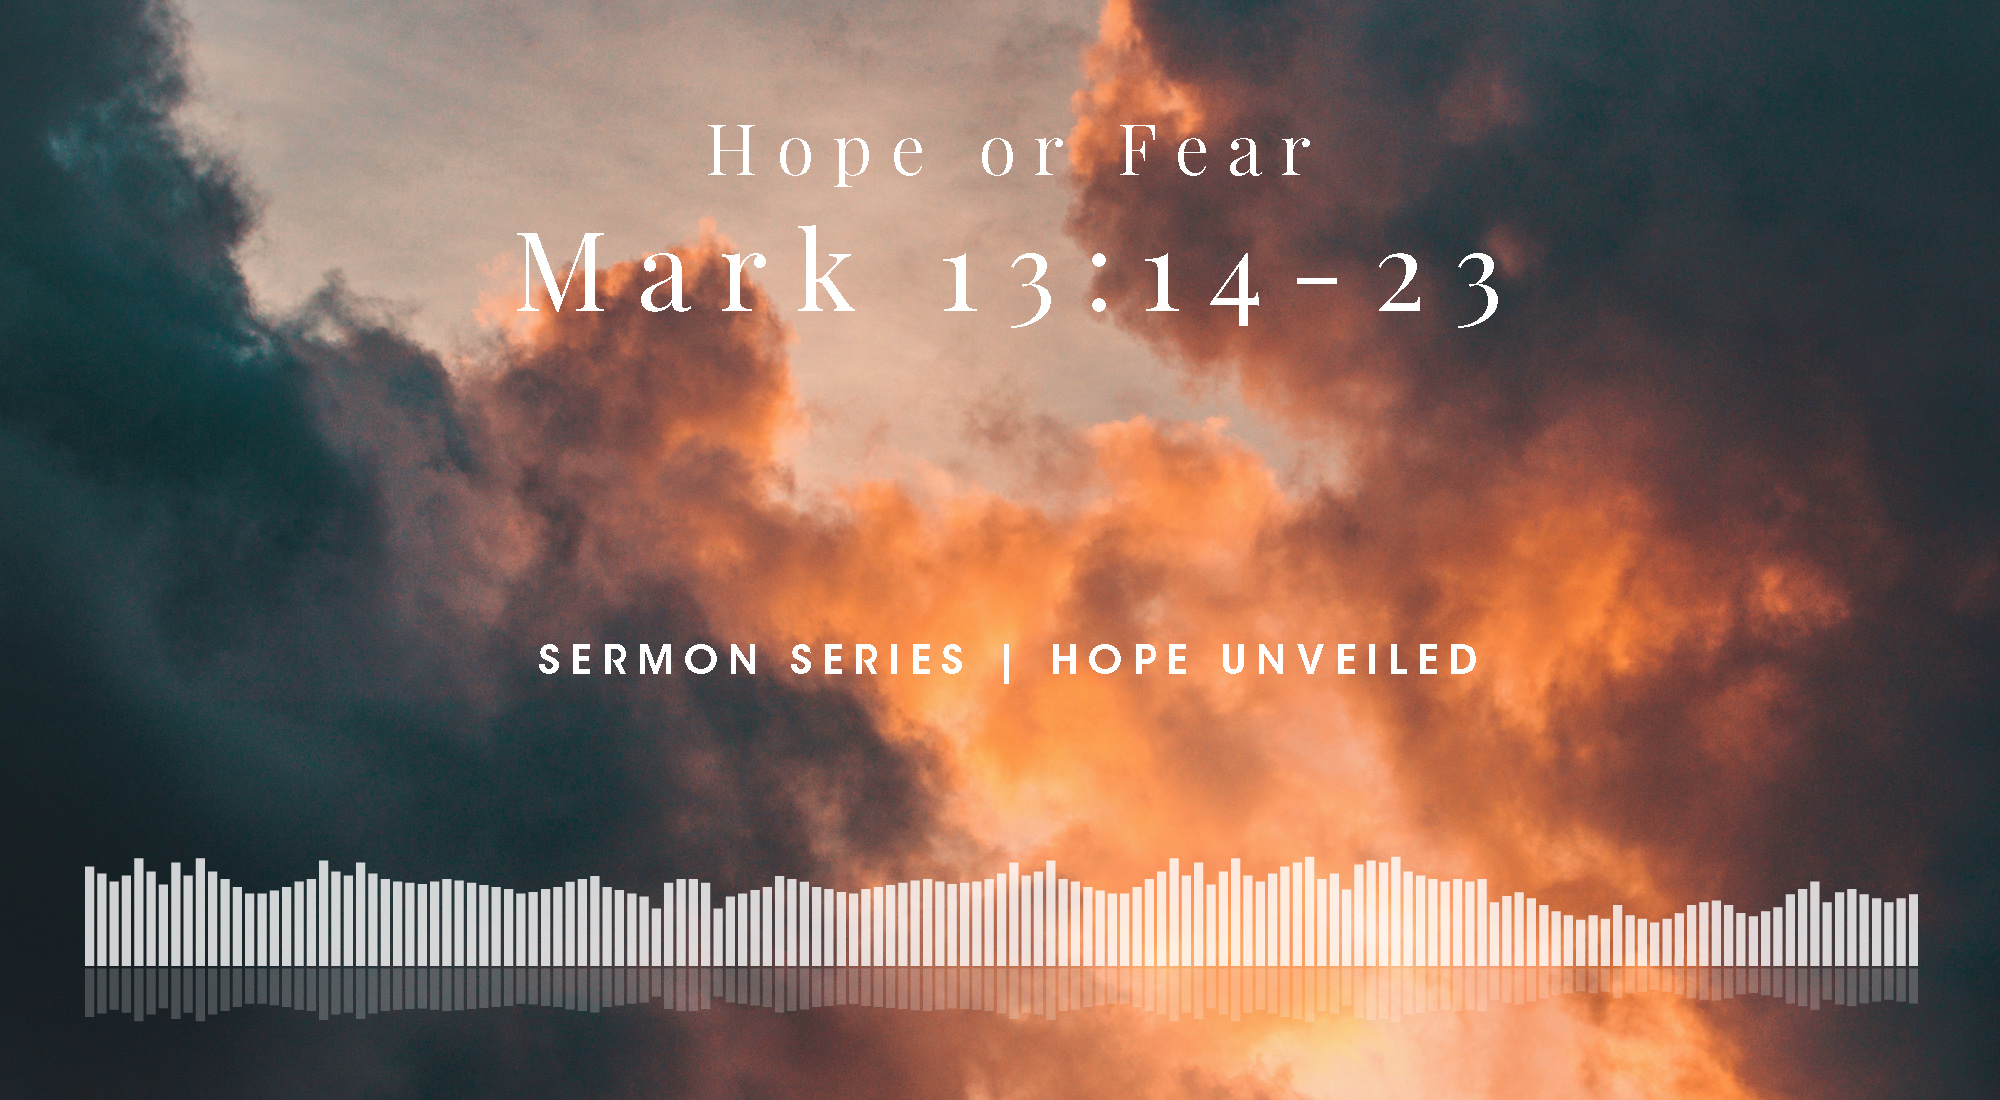 Hope or Fear, Mark 13:14-23 From Our Hope Unveiled Sermon Series